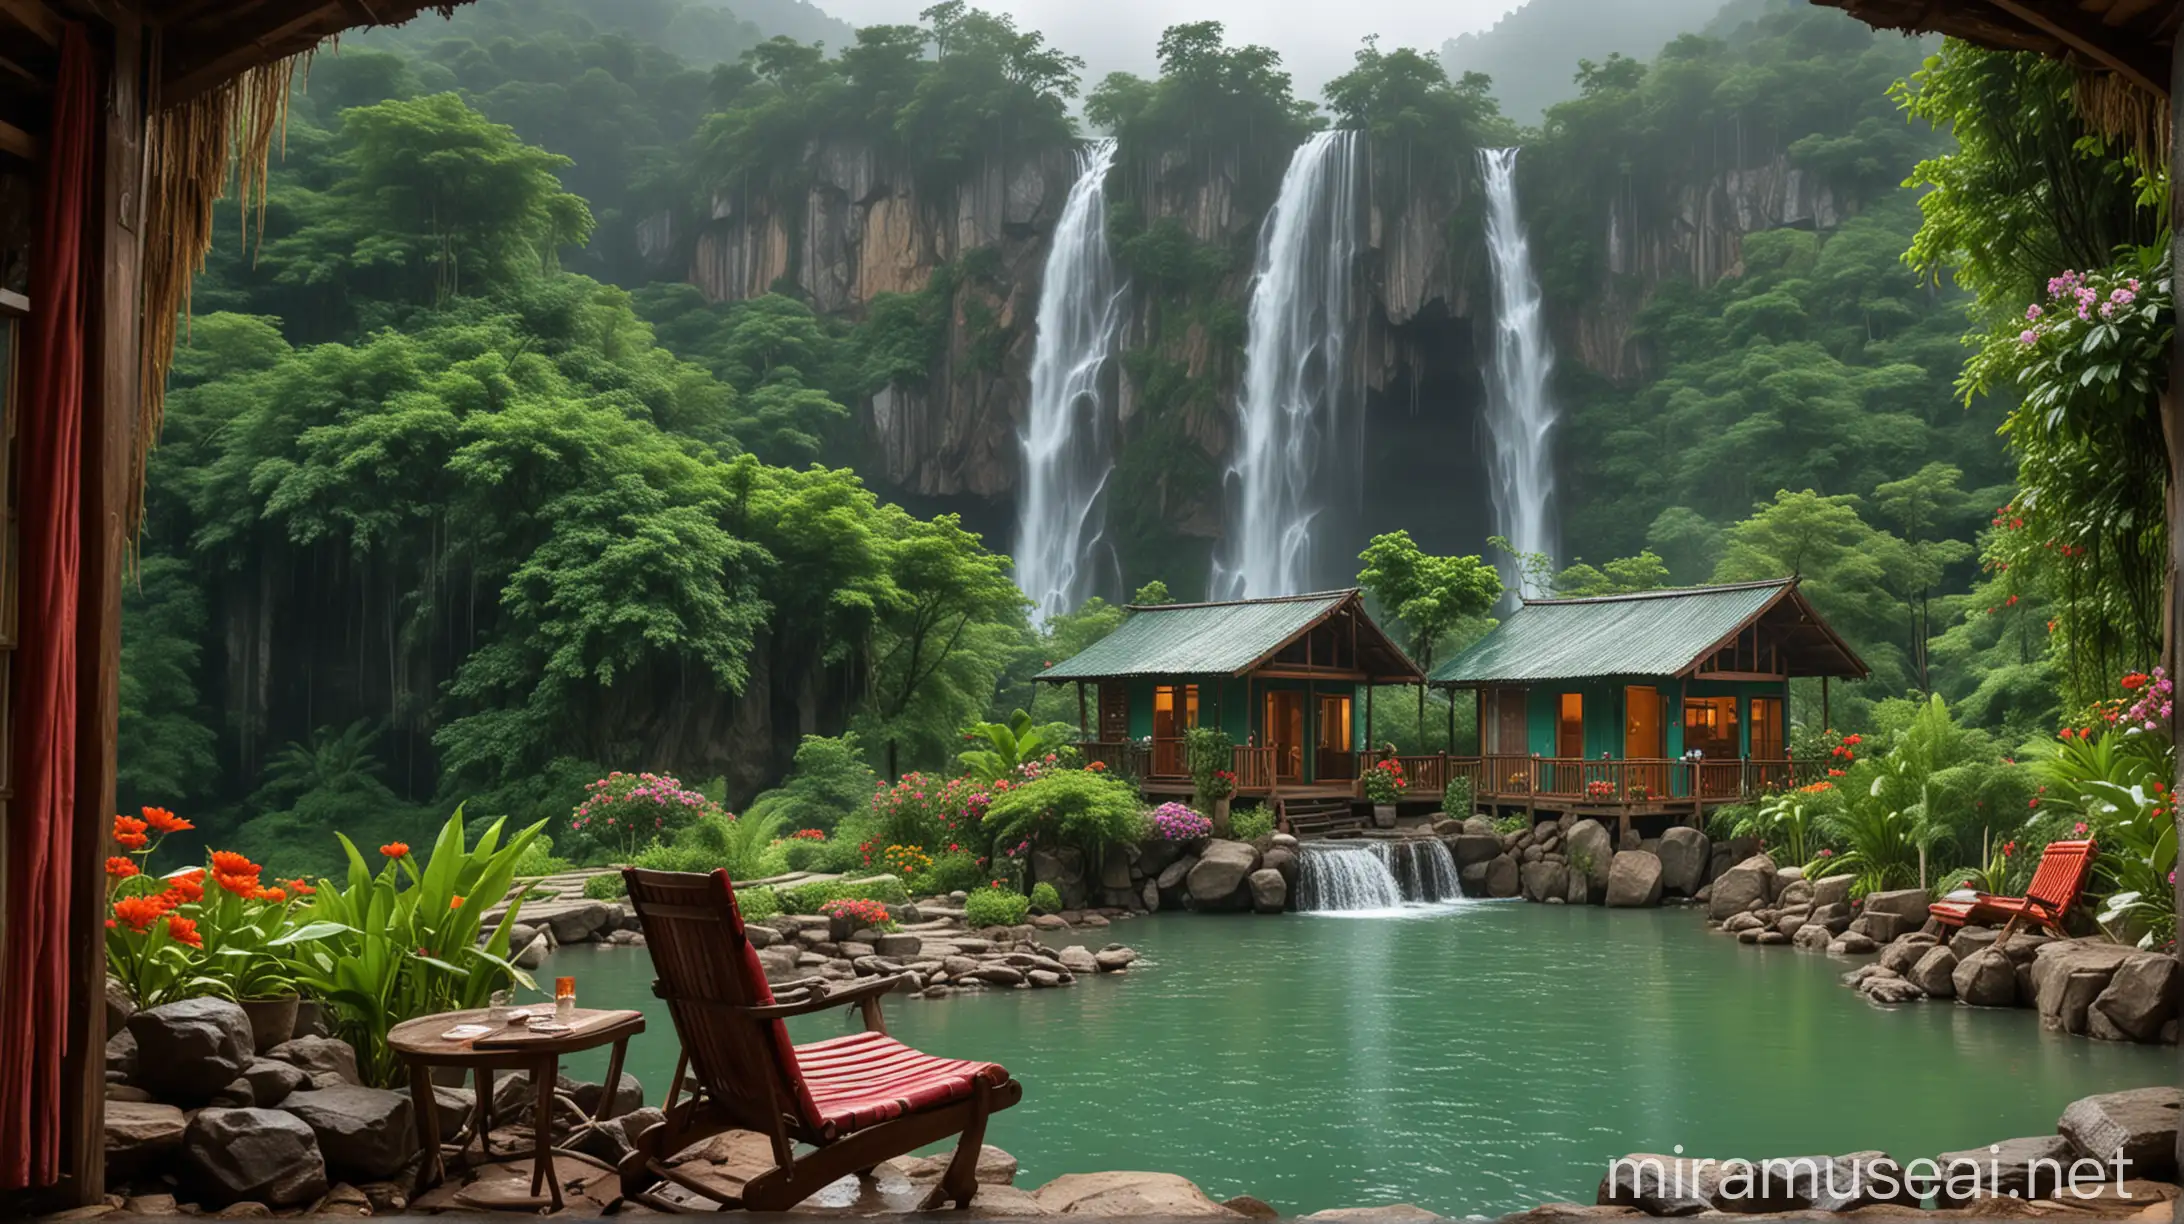 Romantic Monsoon Mountain Retreat Emerald Waterfall Oasis with Sitting Chairs